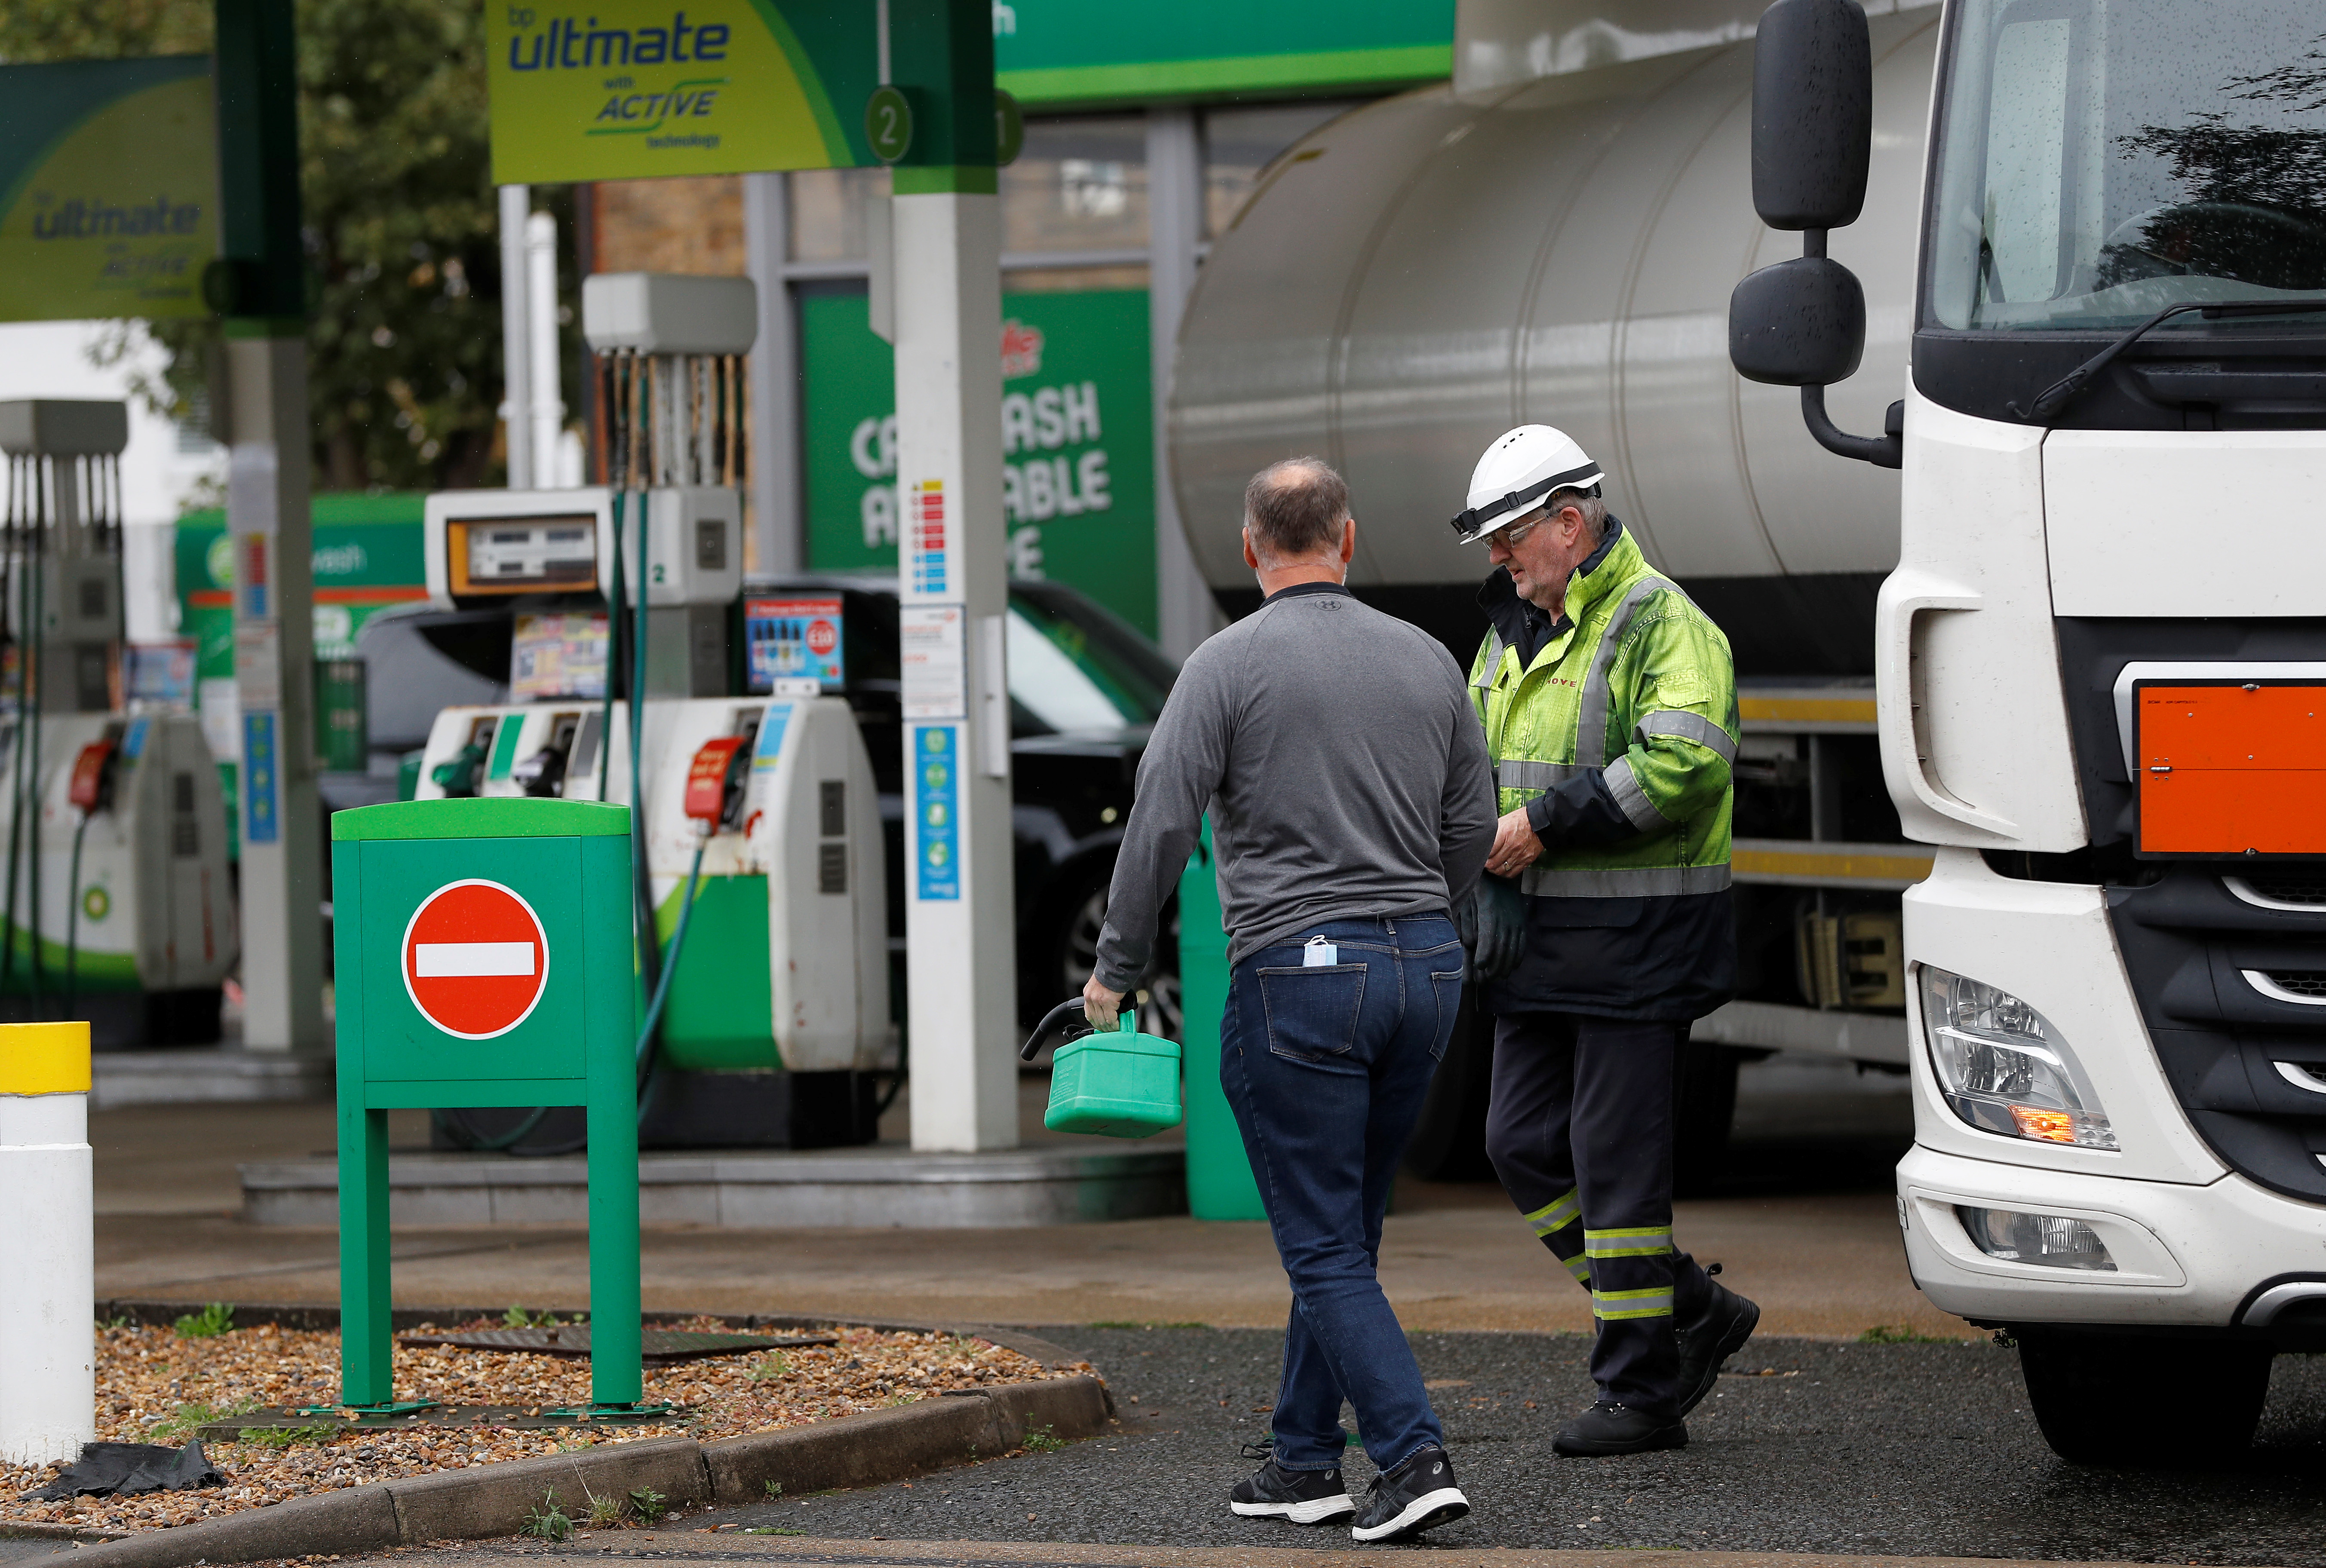 A tanker driver speaks with a customer at a BP filling station in Hersham, Britain, September 30, 2021. REUTERS/Peter Nicholls